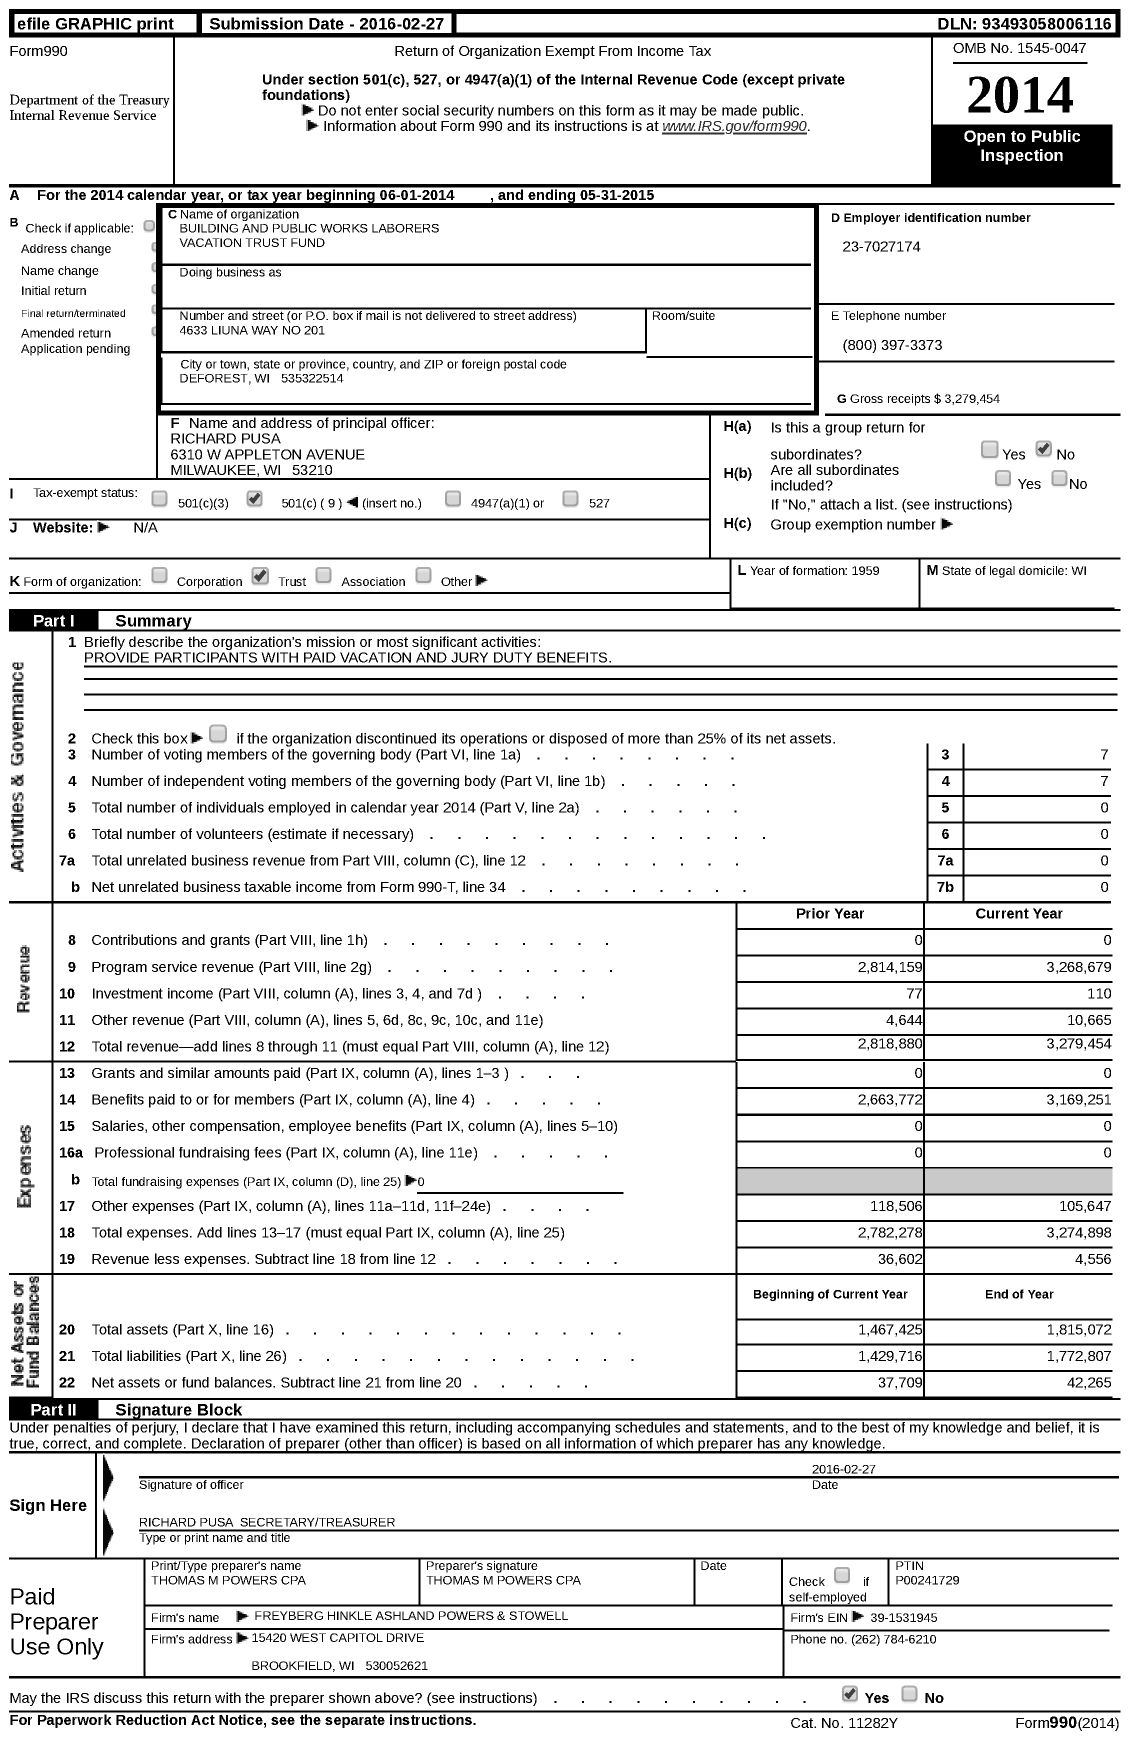 Image of first page of 2014 Form 990 for Building and Public Works Laborers Vacation Trust Fund